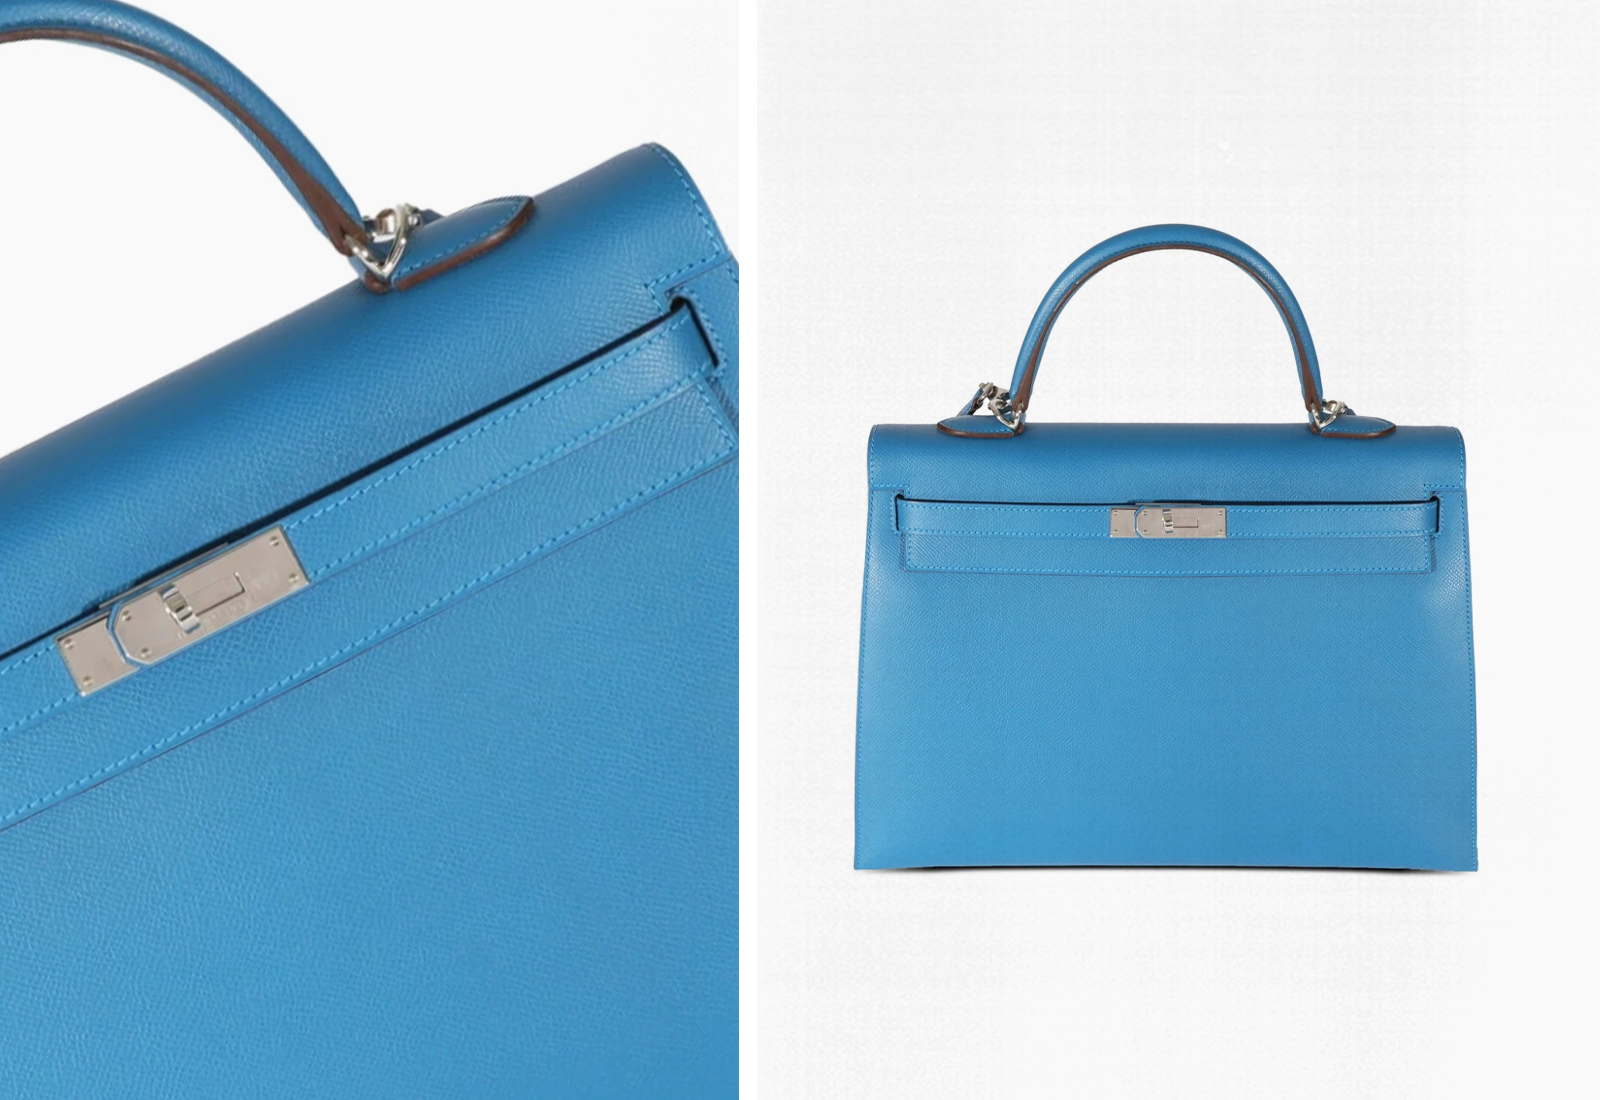 Hermes Bag and Accessories Price List Reference Guide - Spotted Fashion